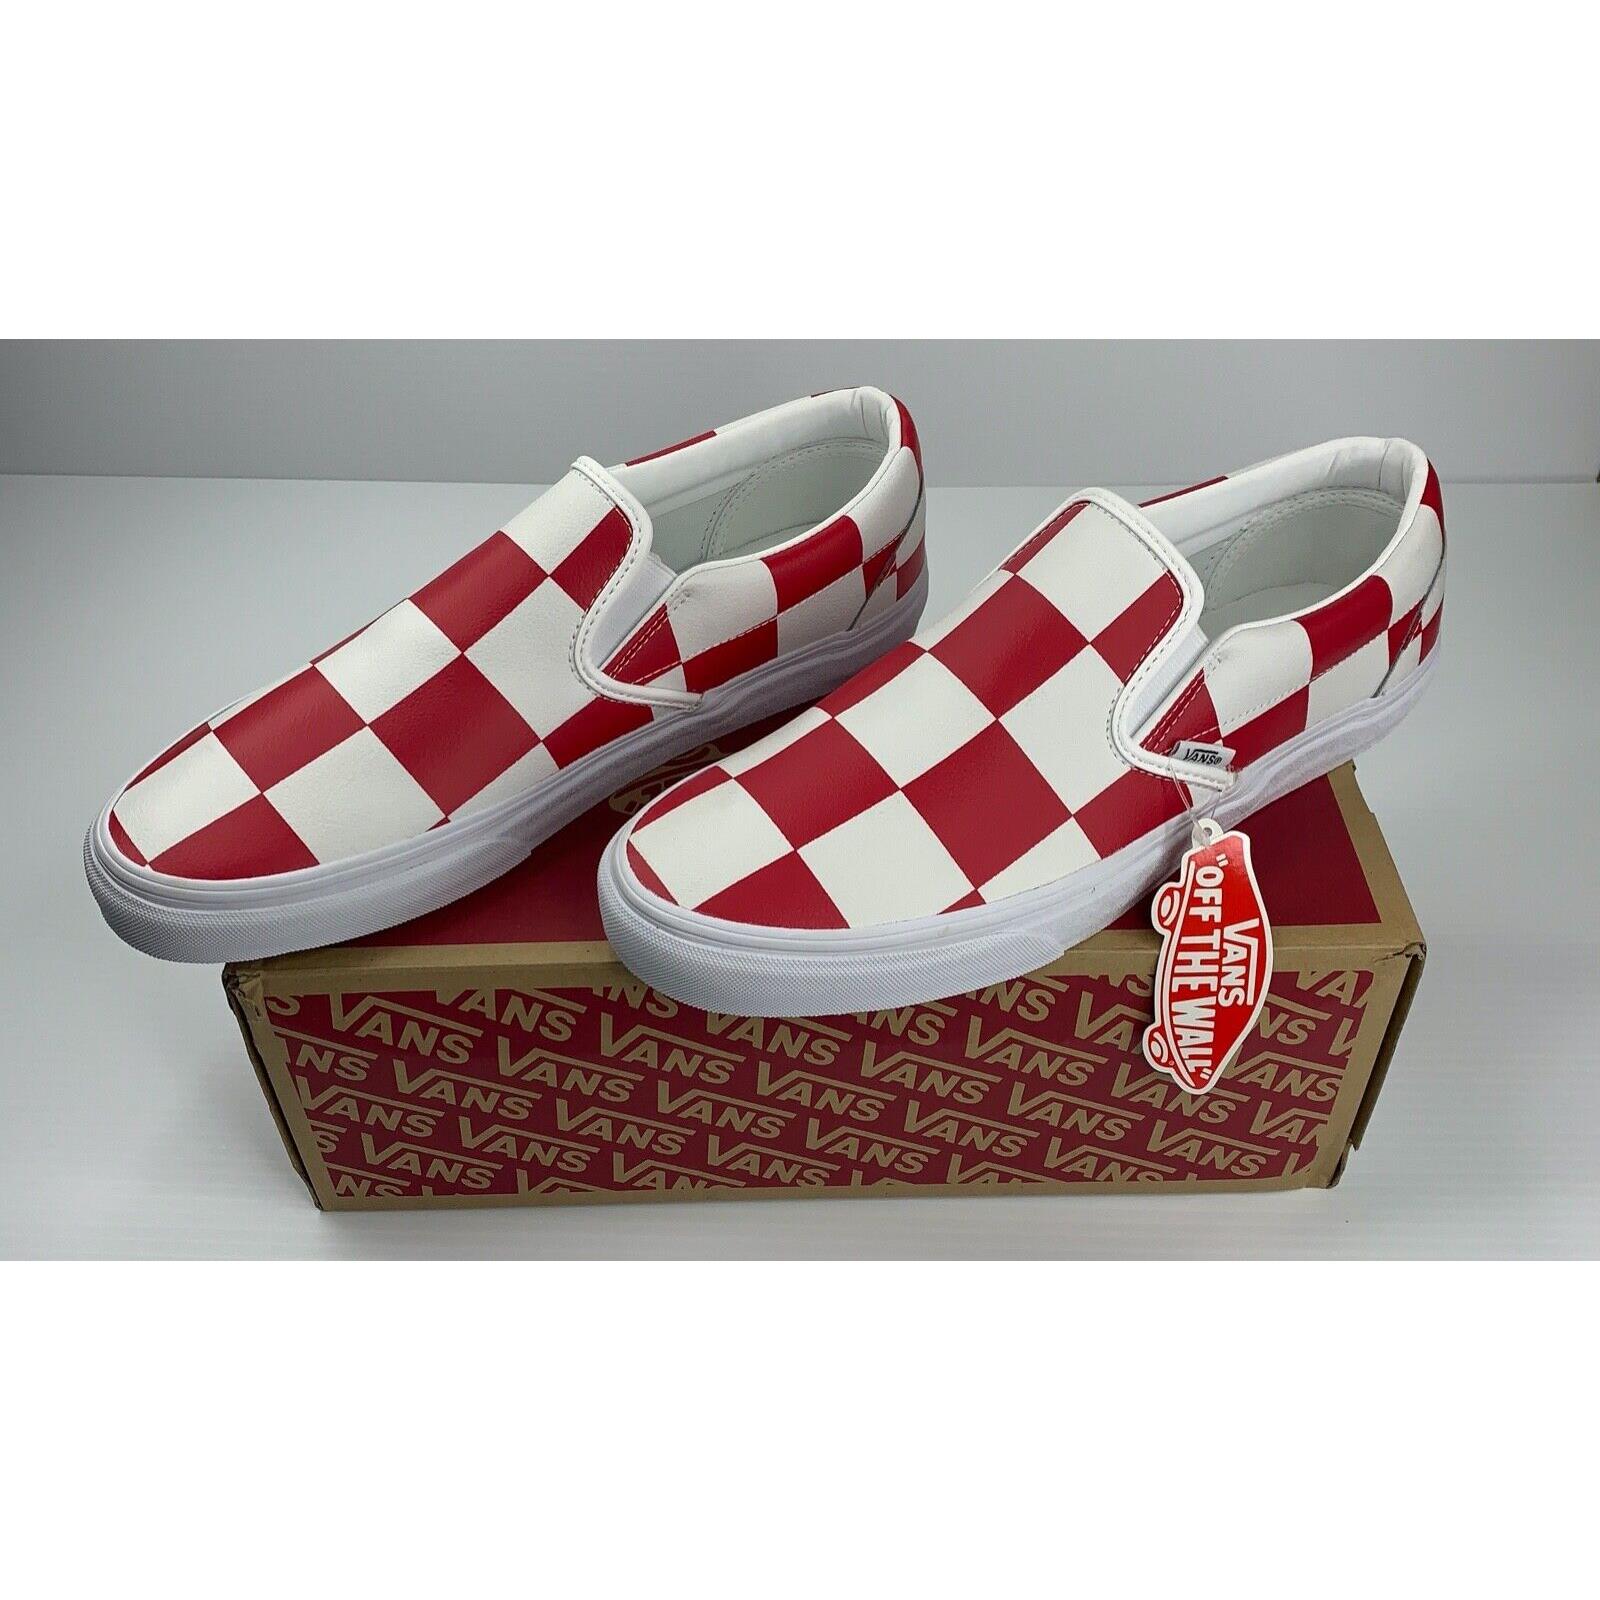 Mens Casual Shoes Size 11.5 Vans Classic Slip On Red White Check Leather